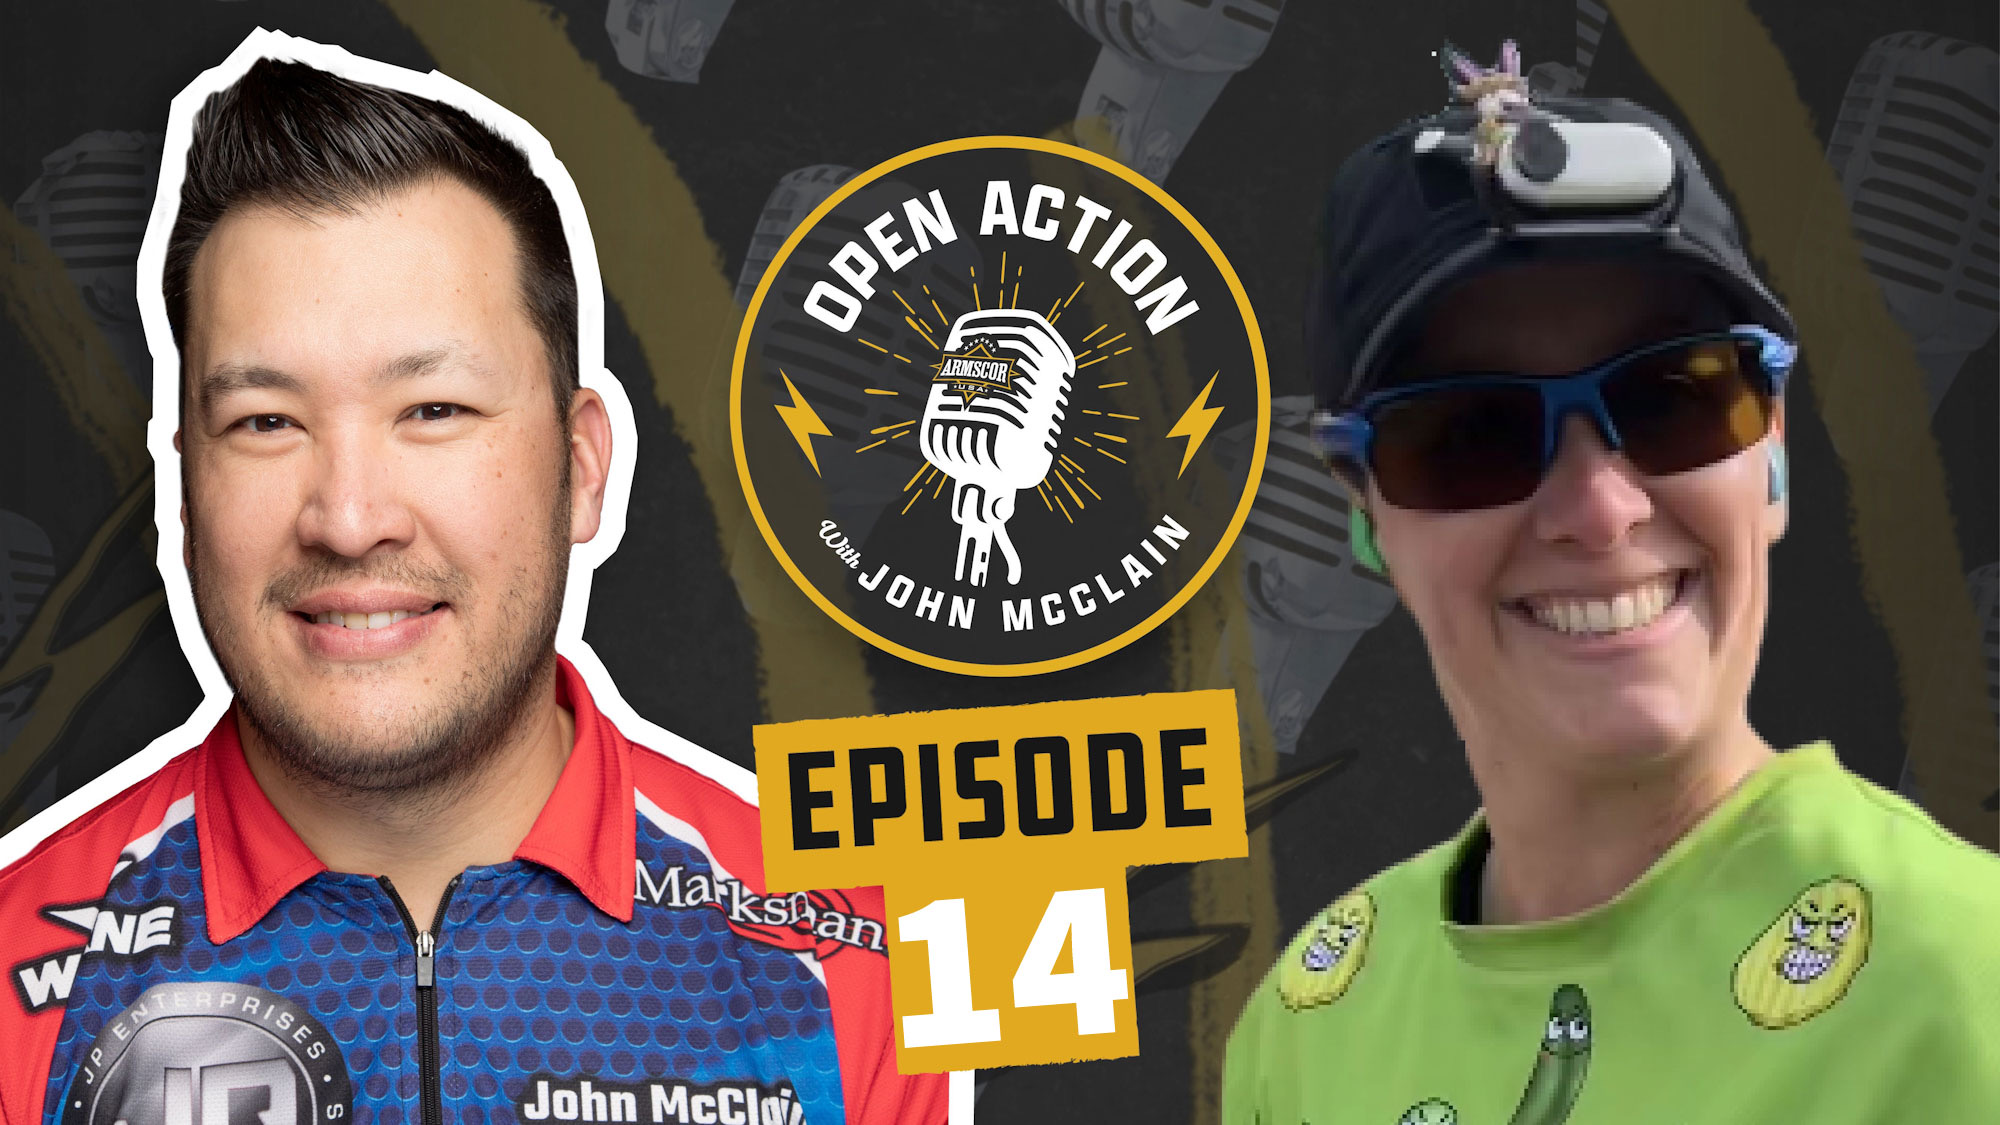 Armscor Open Action Podcast with John McClain & guest Billy Cho